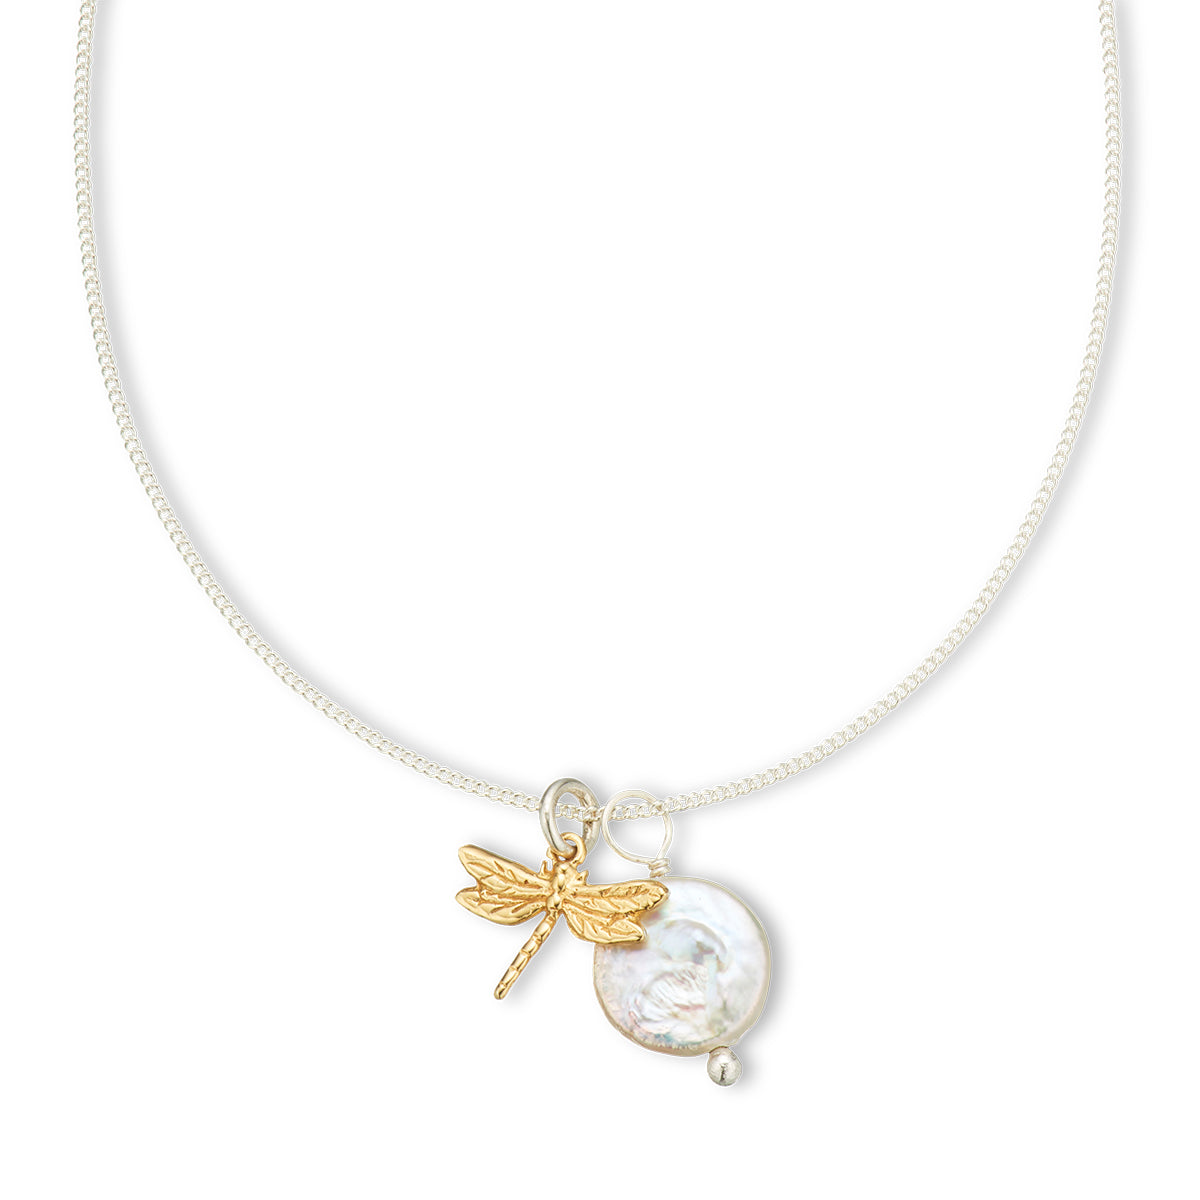 Dragonfly and pearl amulet necklace